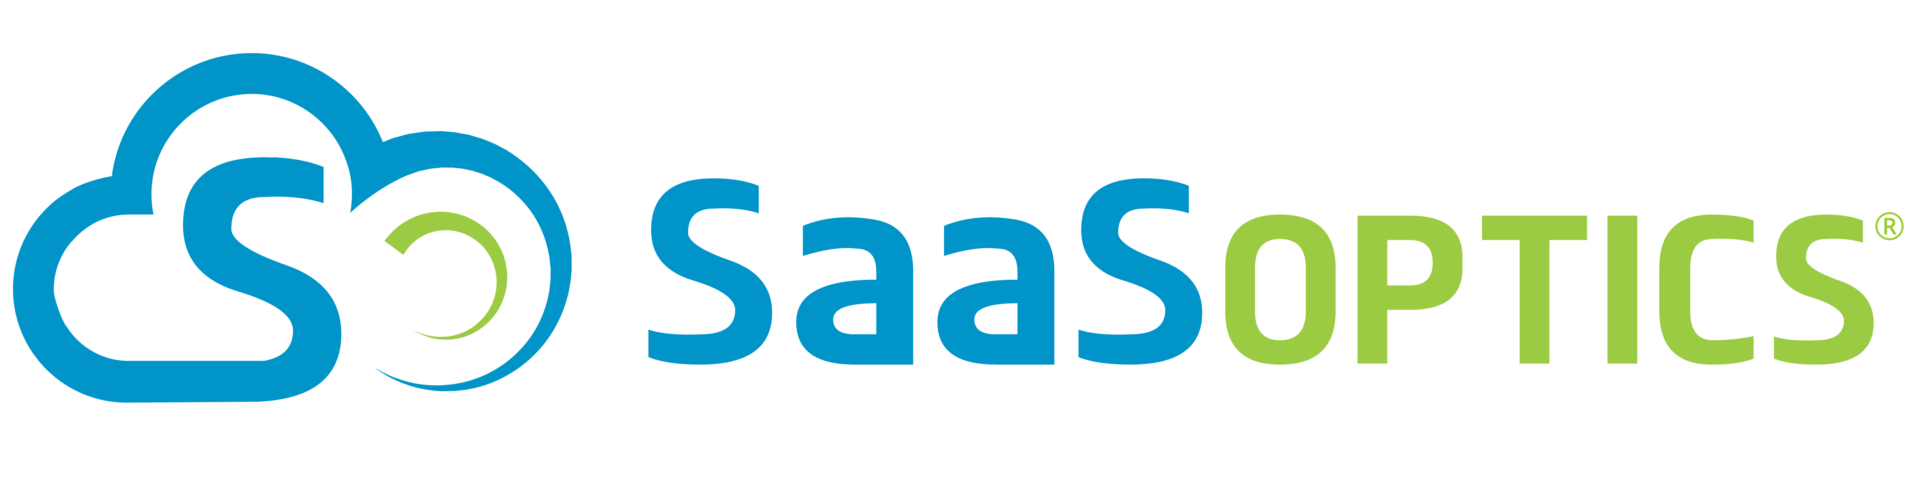 Four Key Elements for Successful SaaS Financial Operations